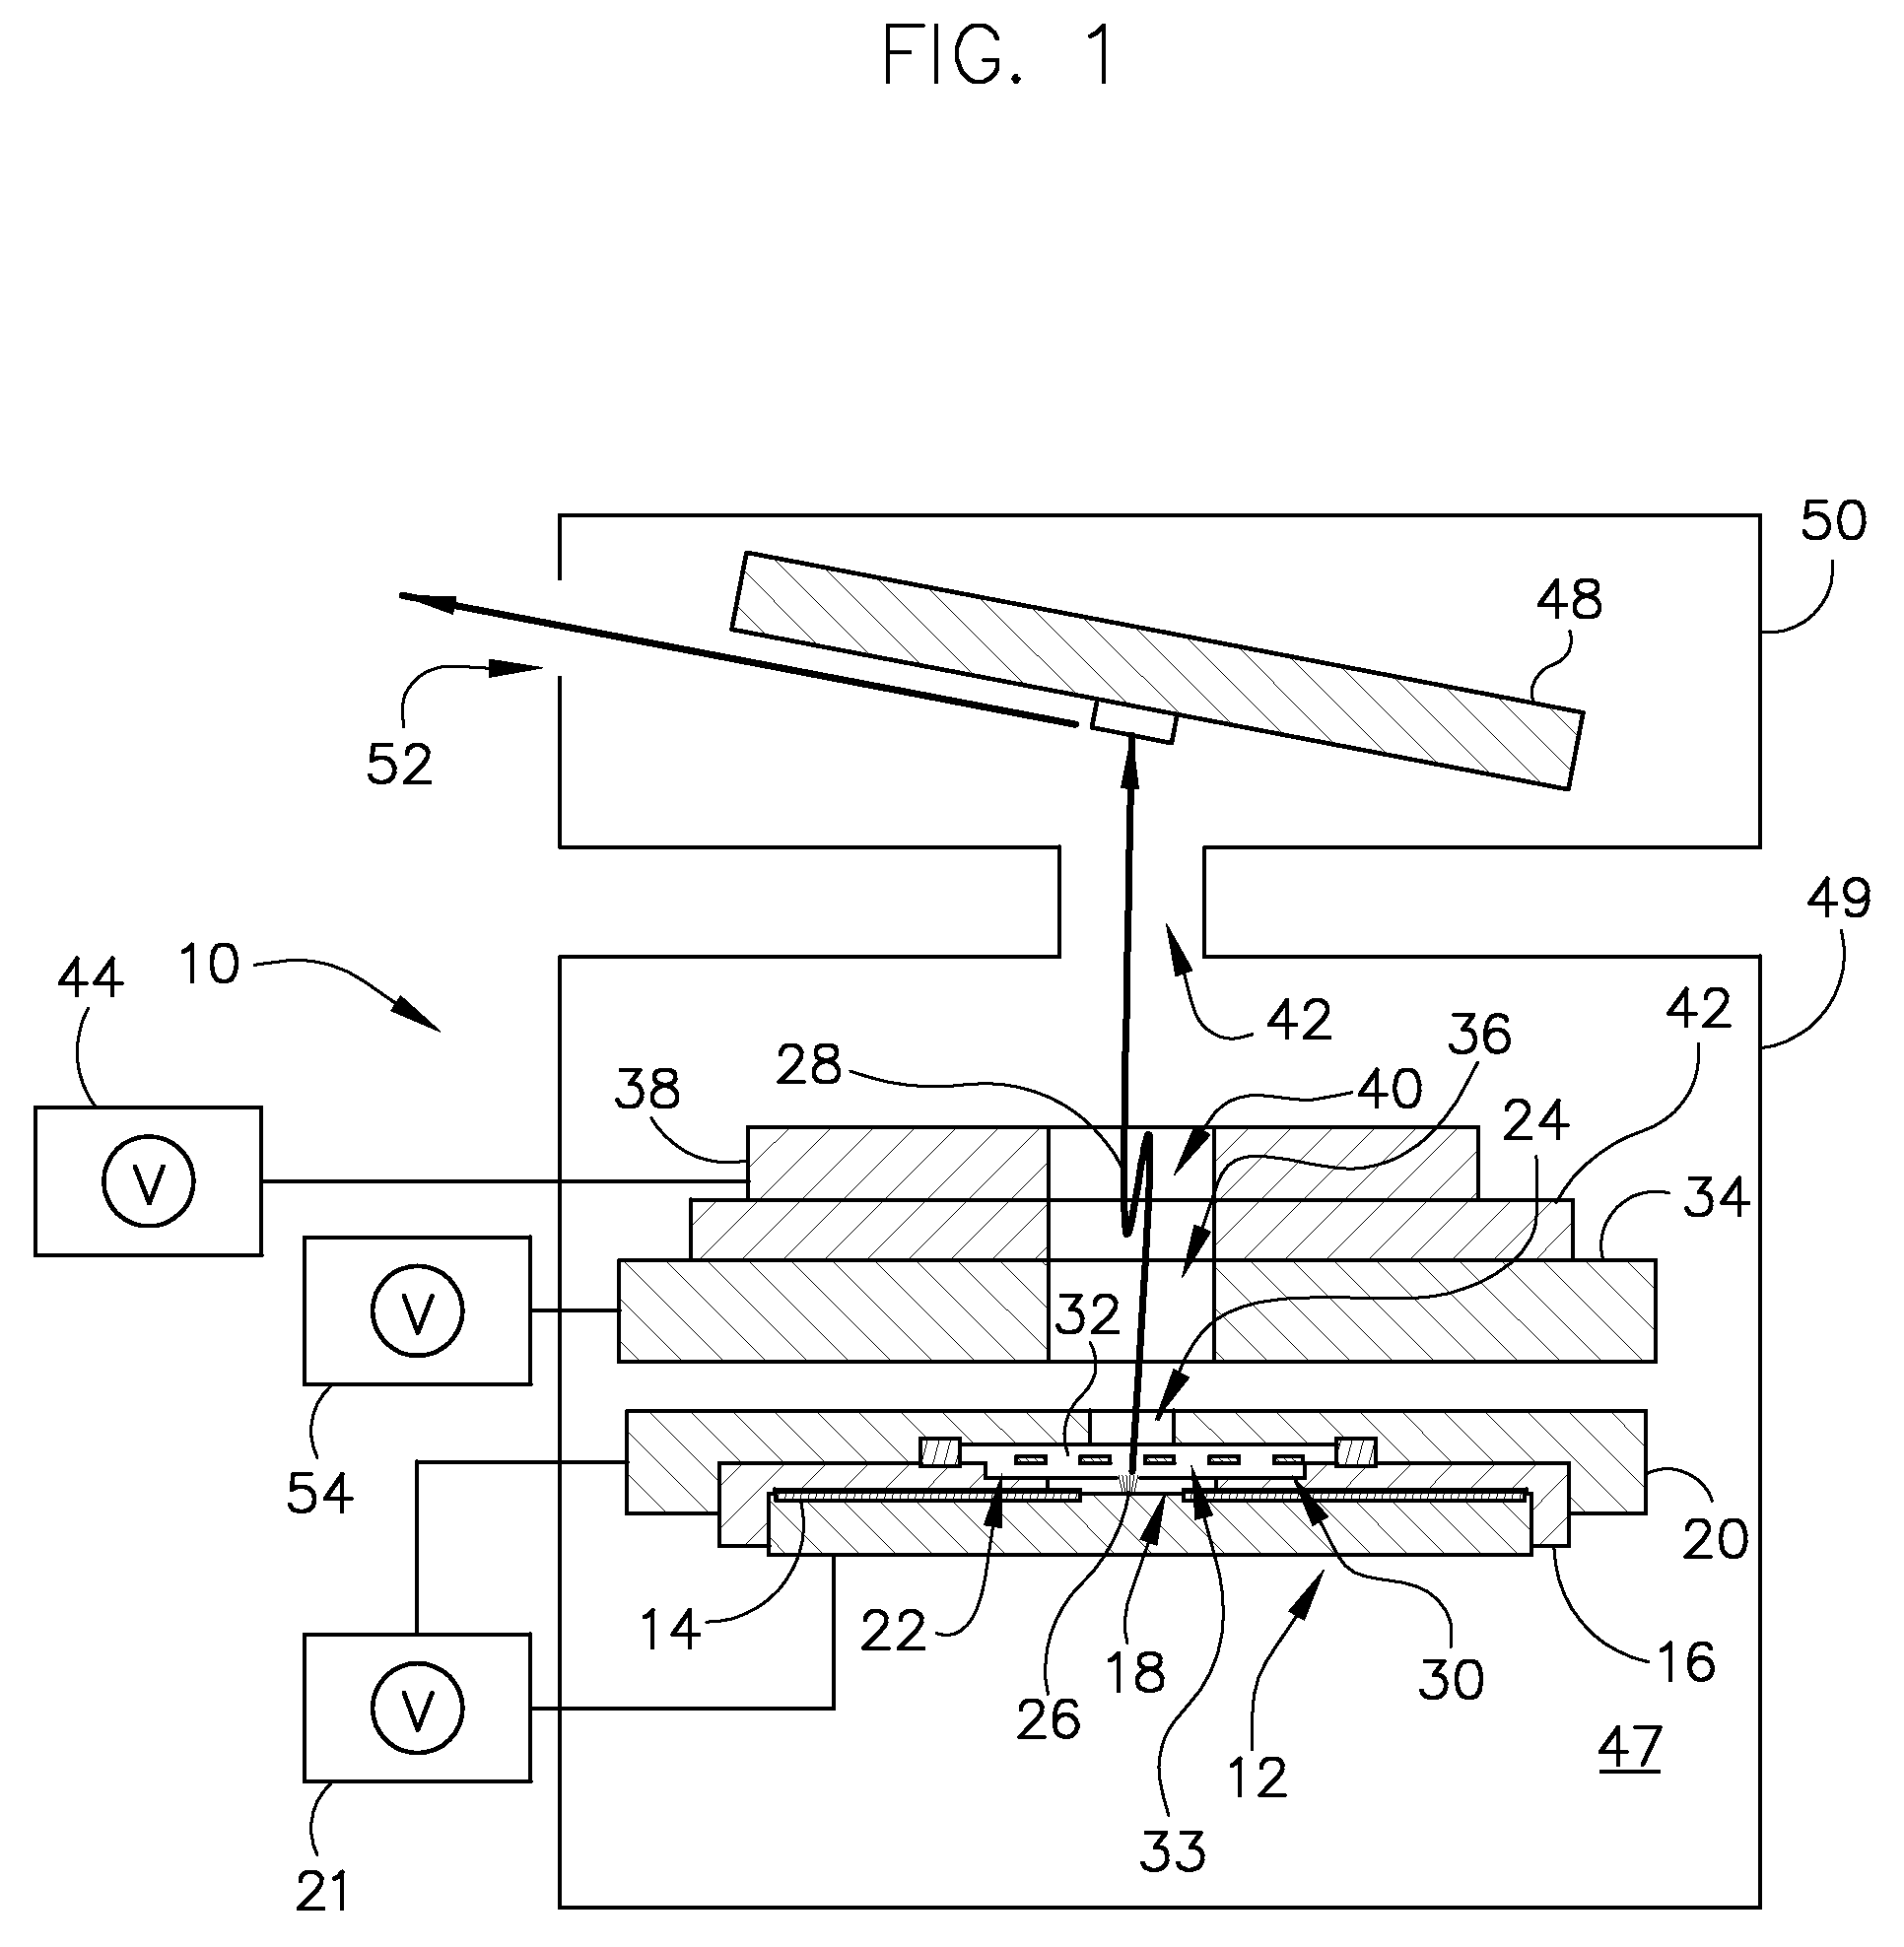 Apparatus for modifying electron beam aspect ratio for X-ray generation